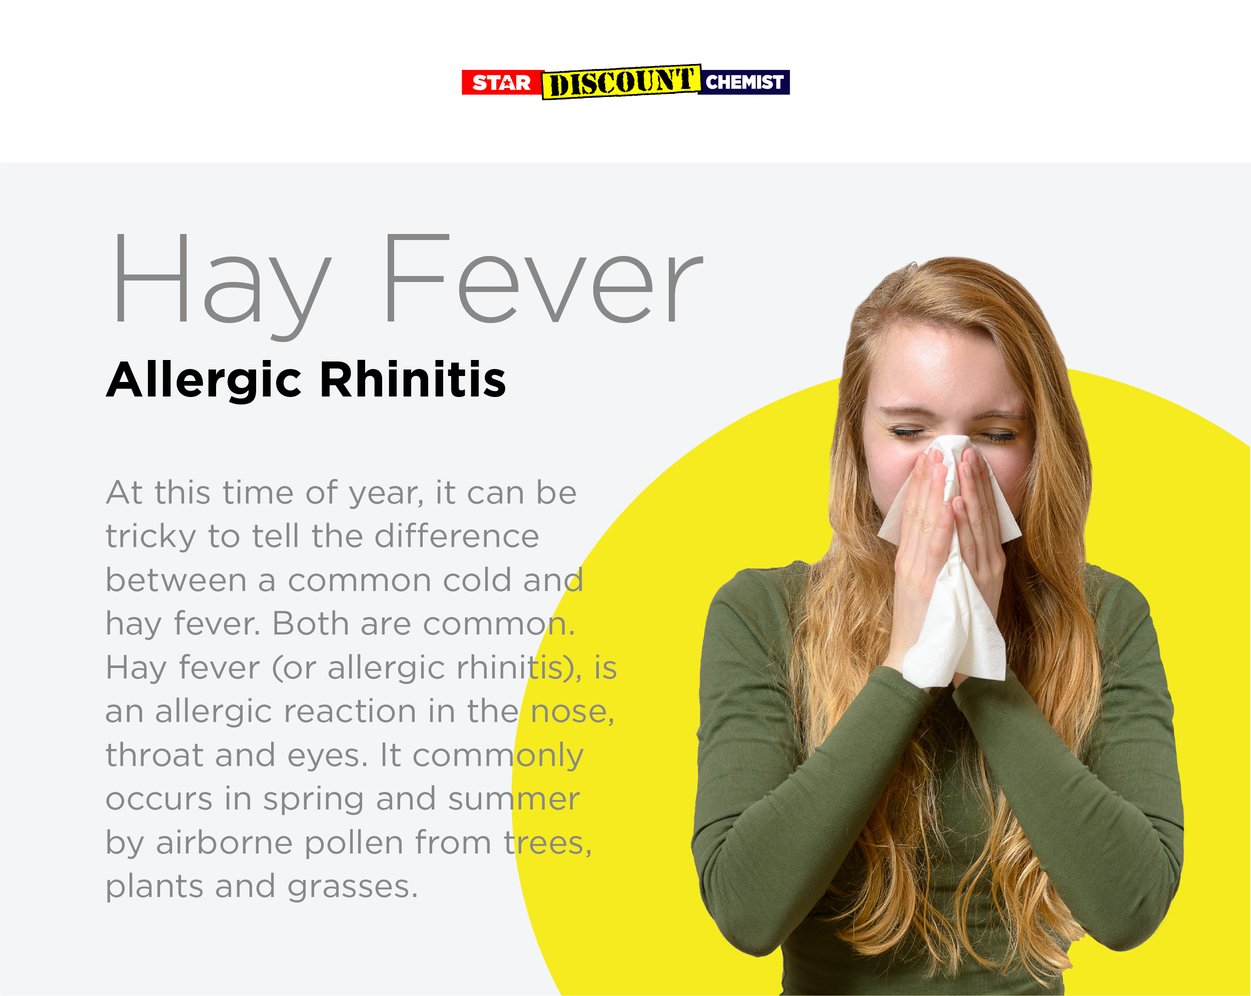 What should I do if I have Hay Fever?